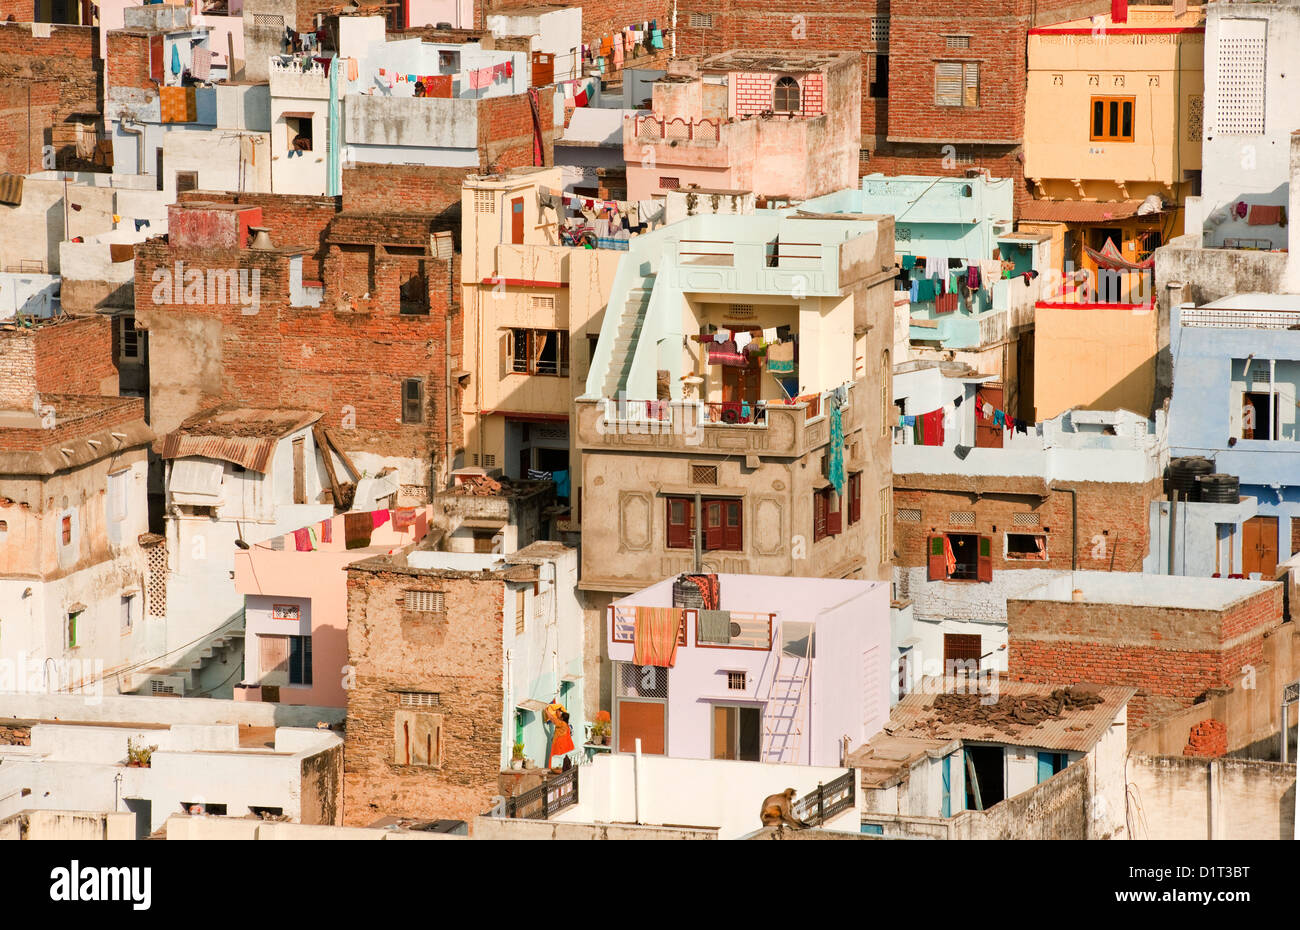 A view of the colorful rooftops of Udaipur Rajasthan India with some people and washing lines and geometric shapes of buildings Stock Photo